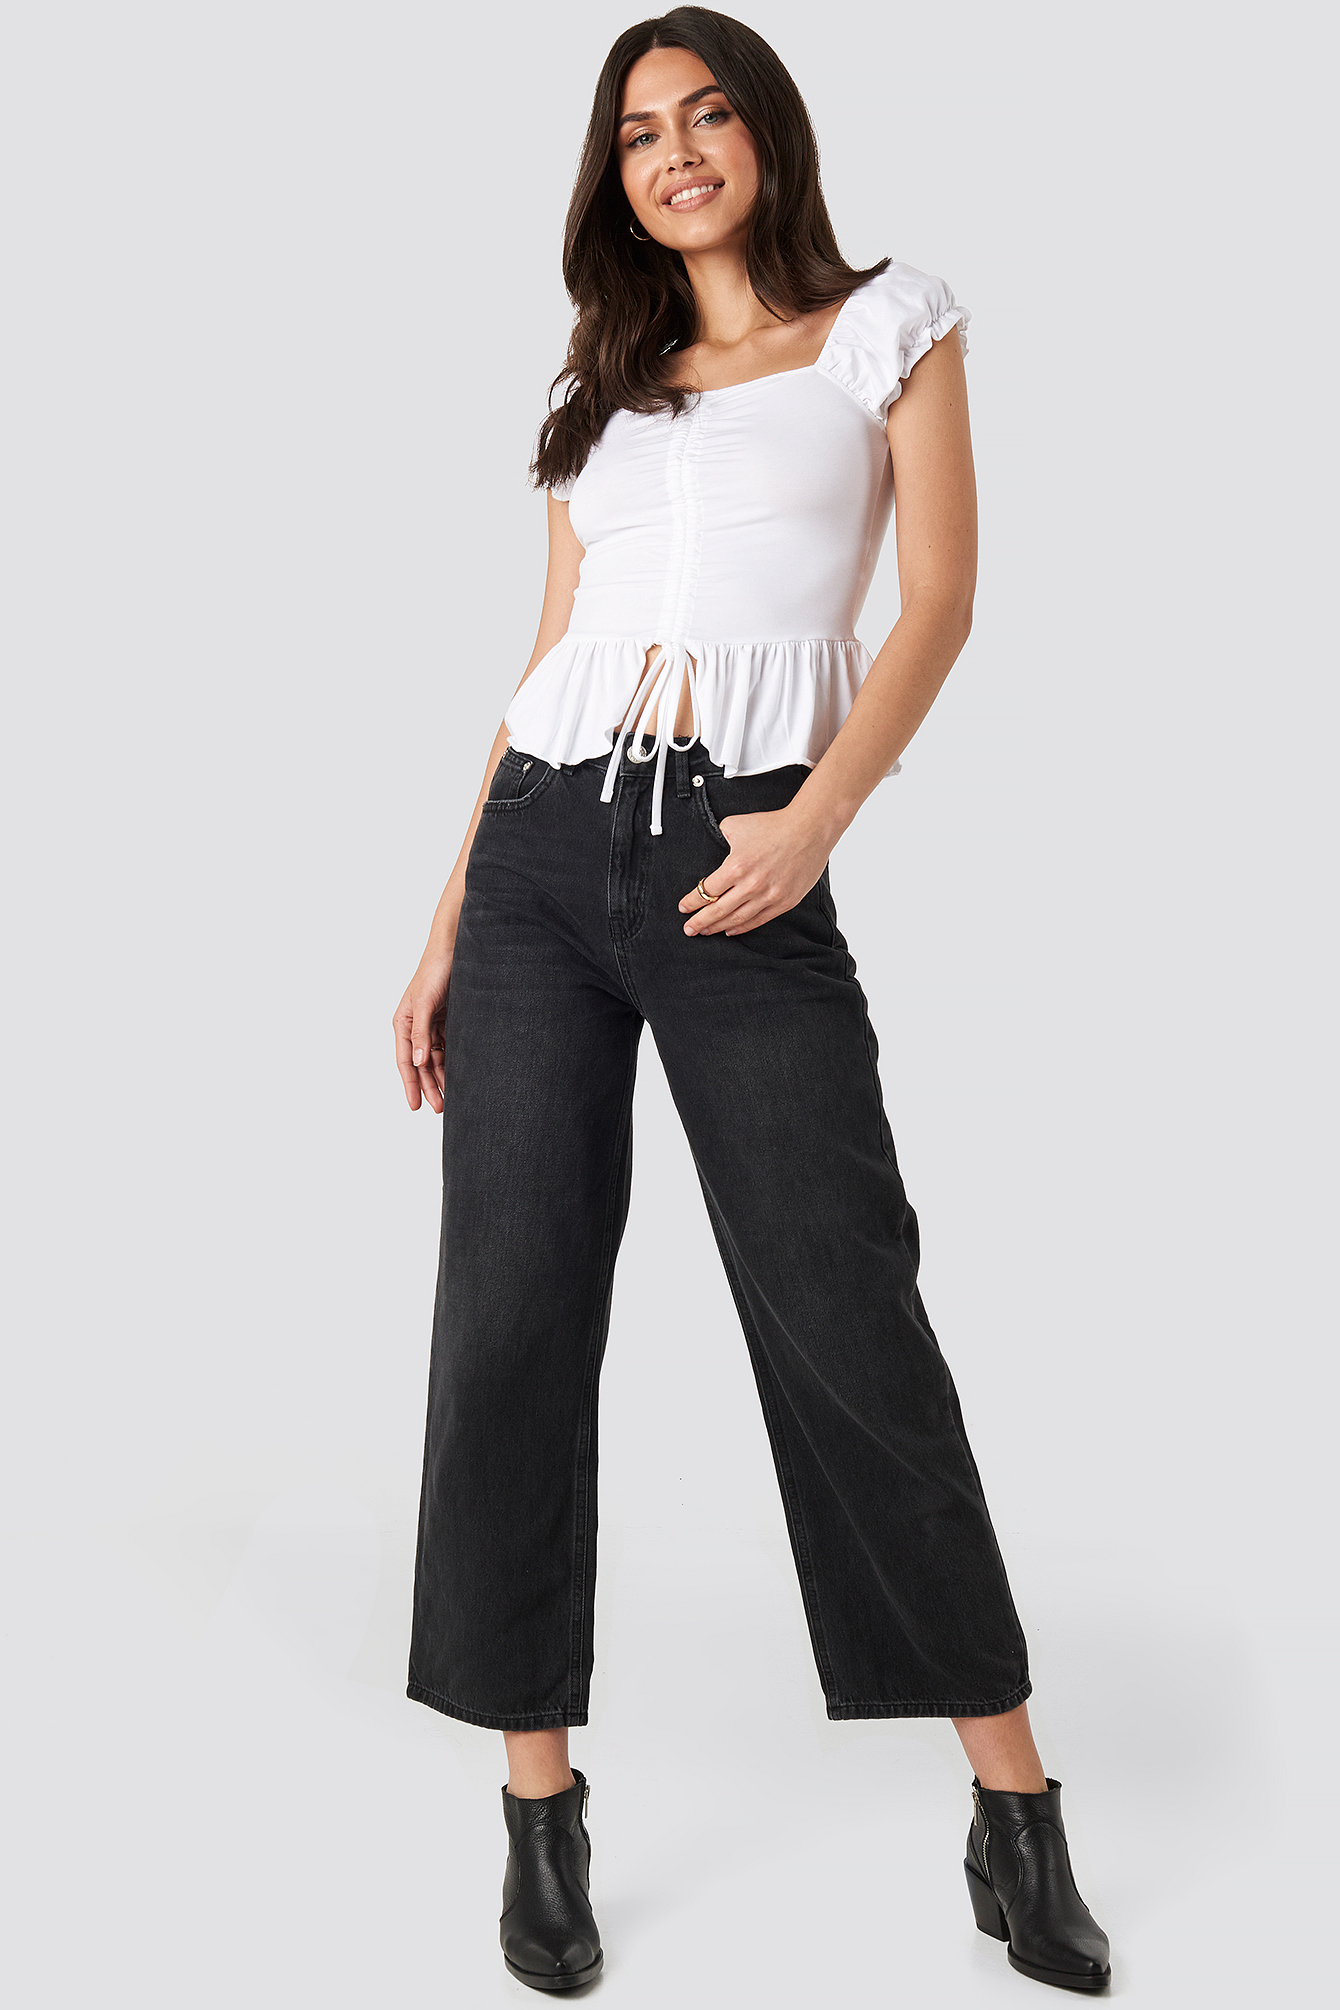 White Ruched Bardot Crop Top